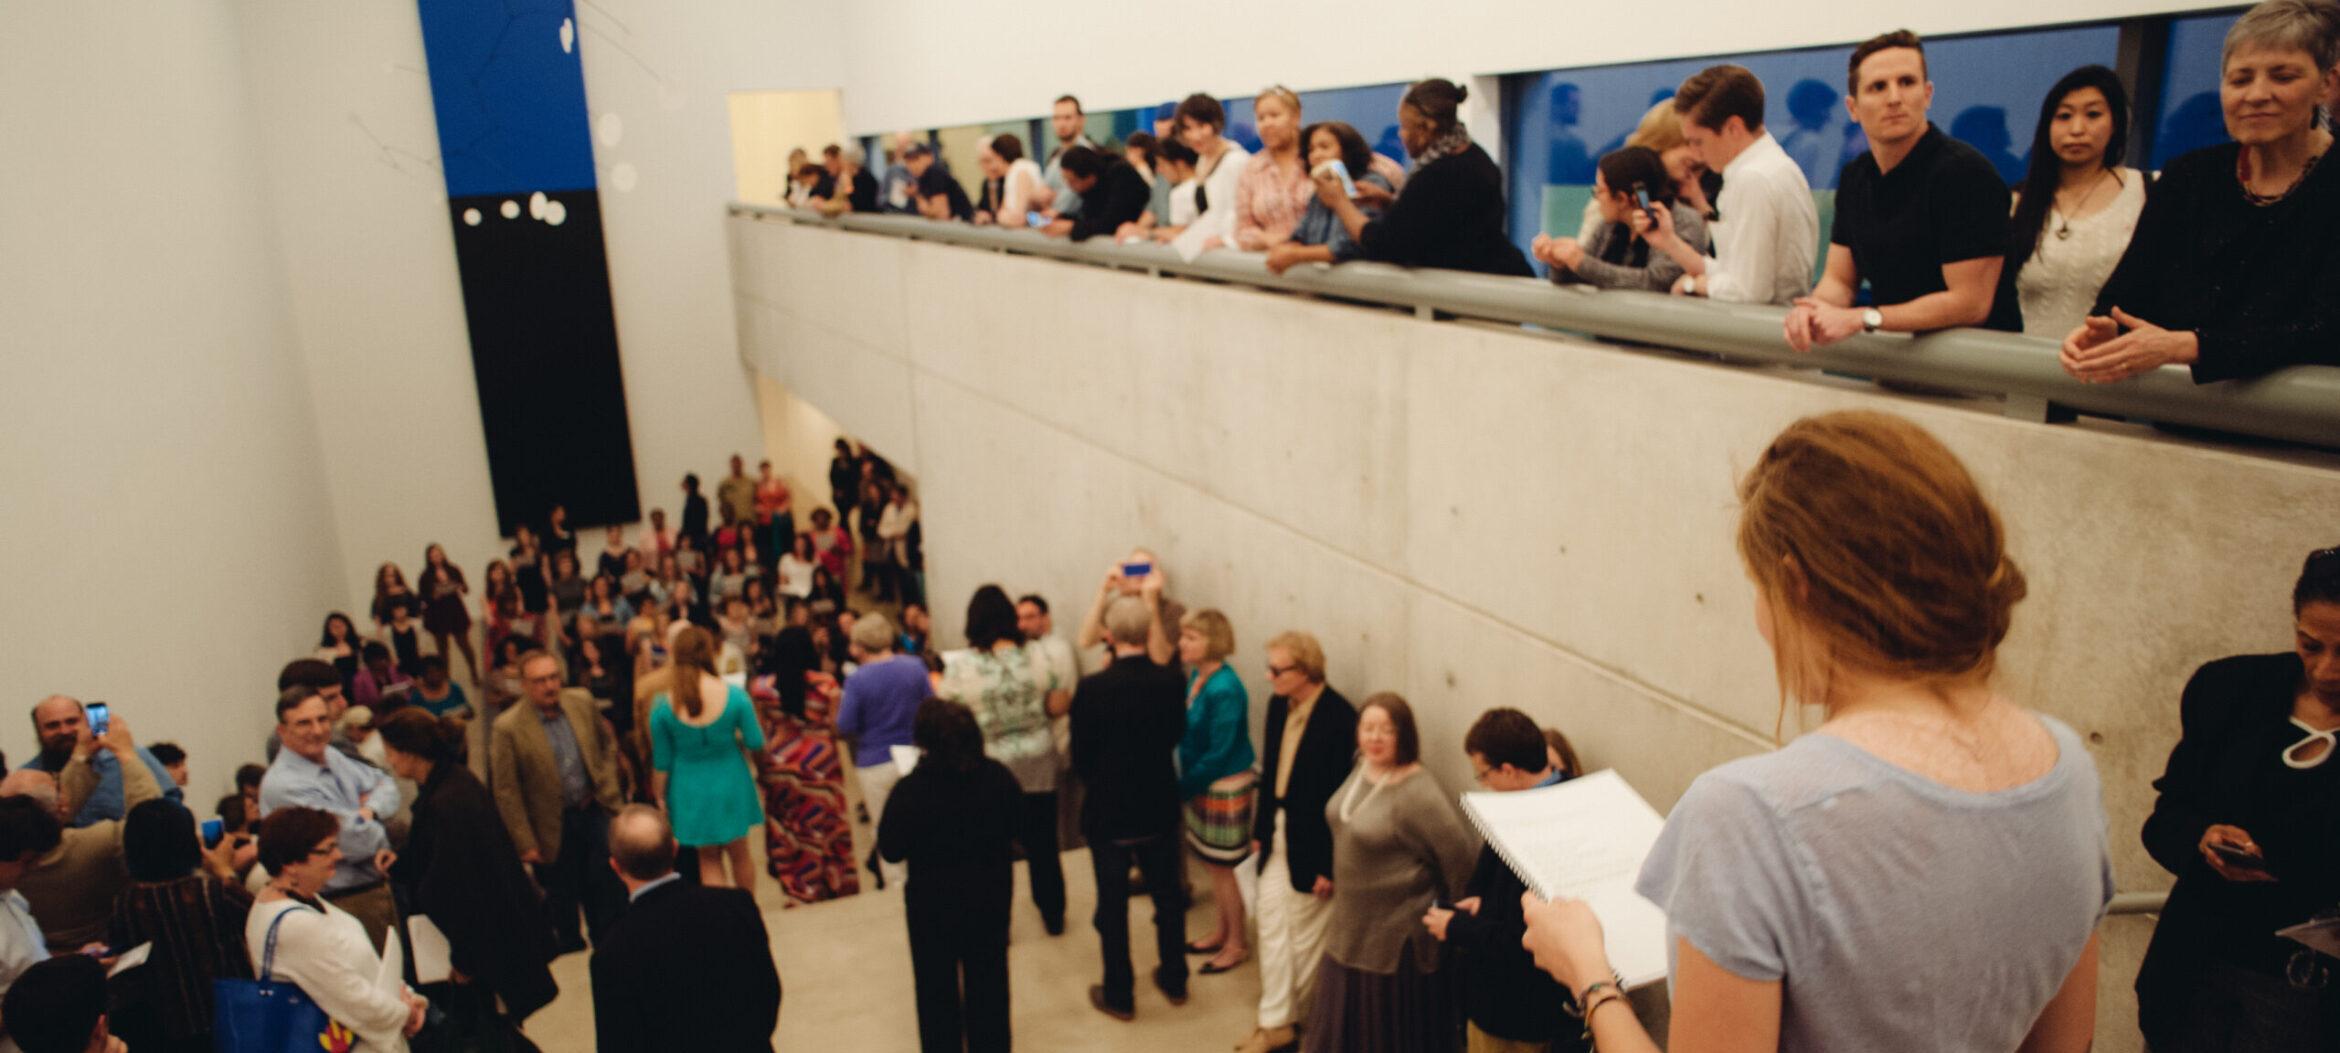 Visitors gathering in the main gallery of a public reception at the Pulitzer.